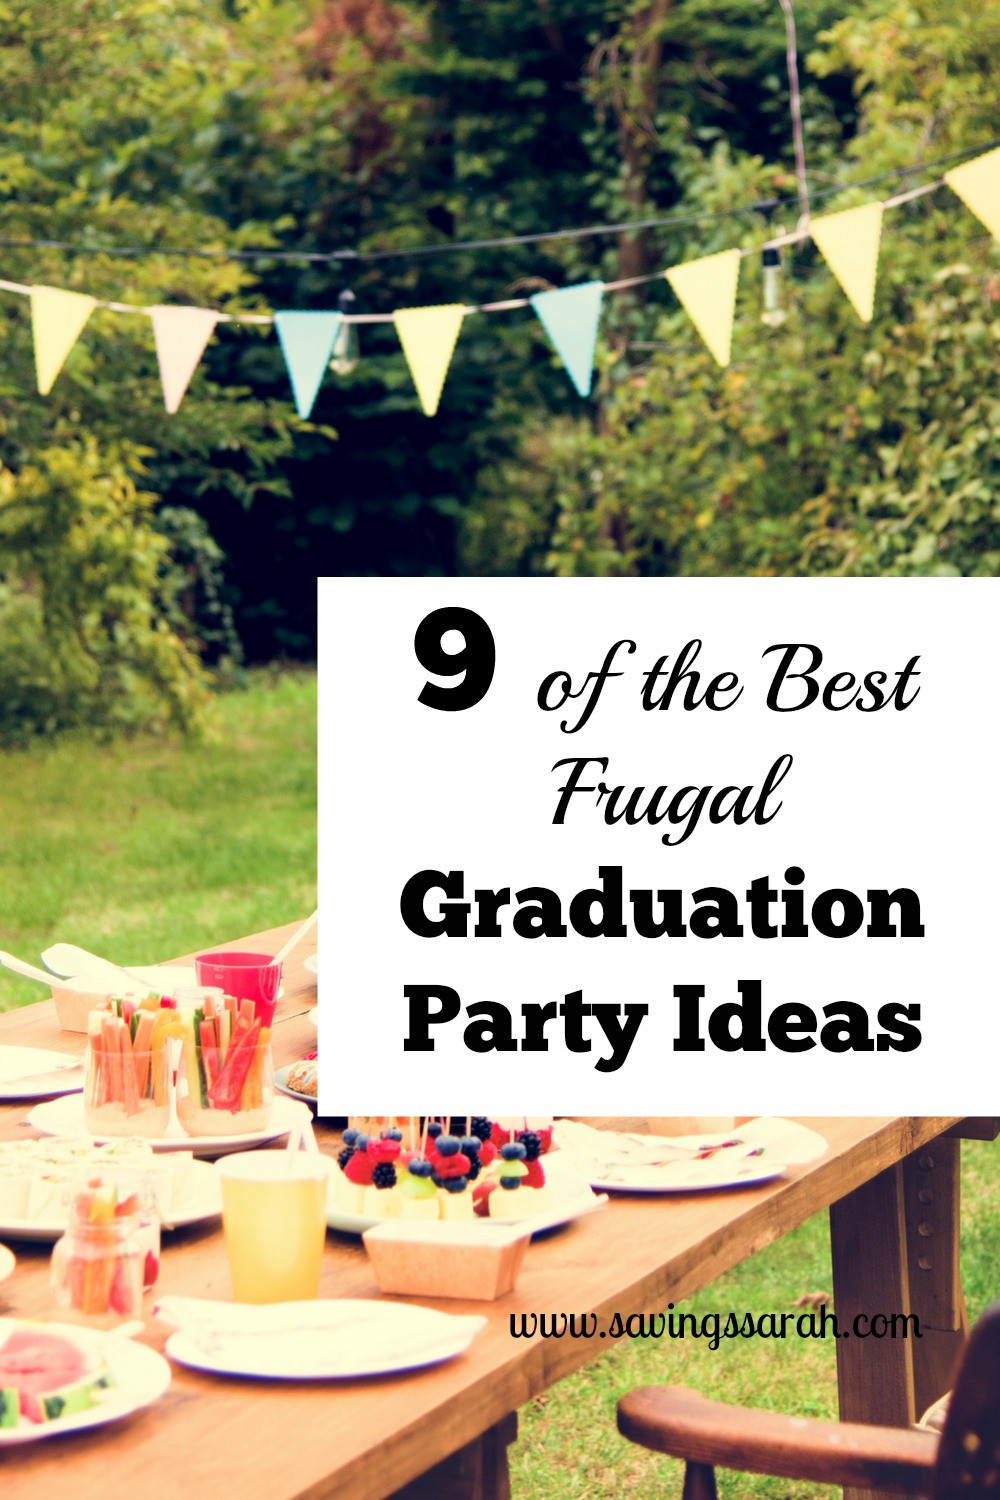 Party Decoration Ideas For College Graduation
 9 the Best Frugal Graduation Party Ideas Earning and